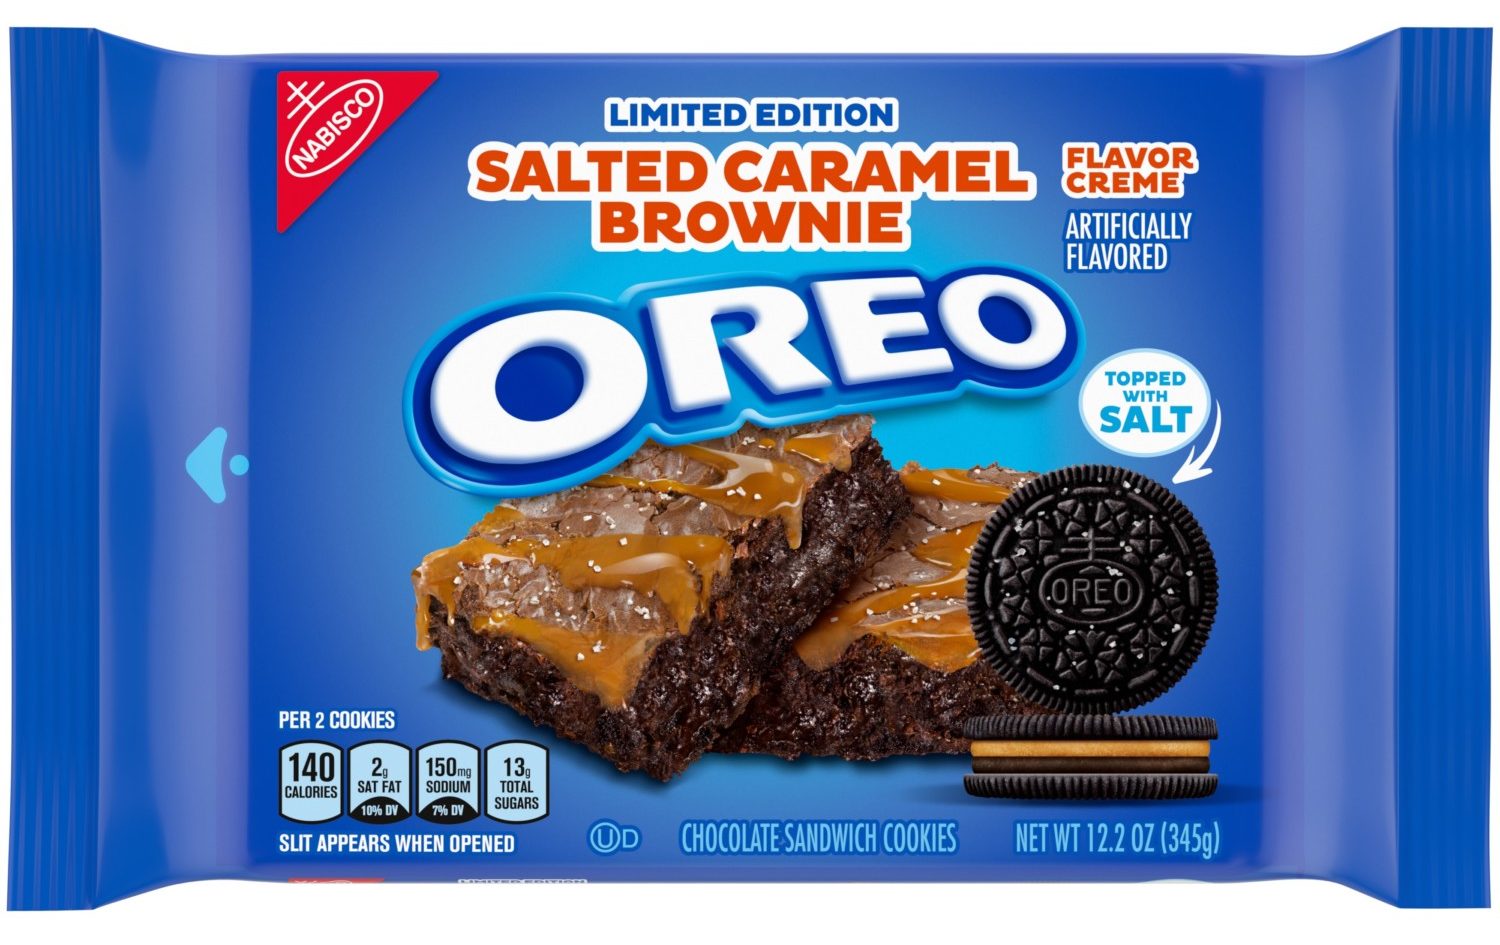 New Oreo Salted Caramel Brownie Cookie Is Actually Topped With Salt